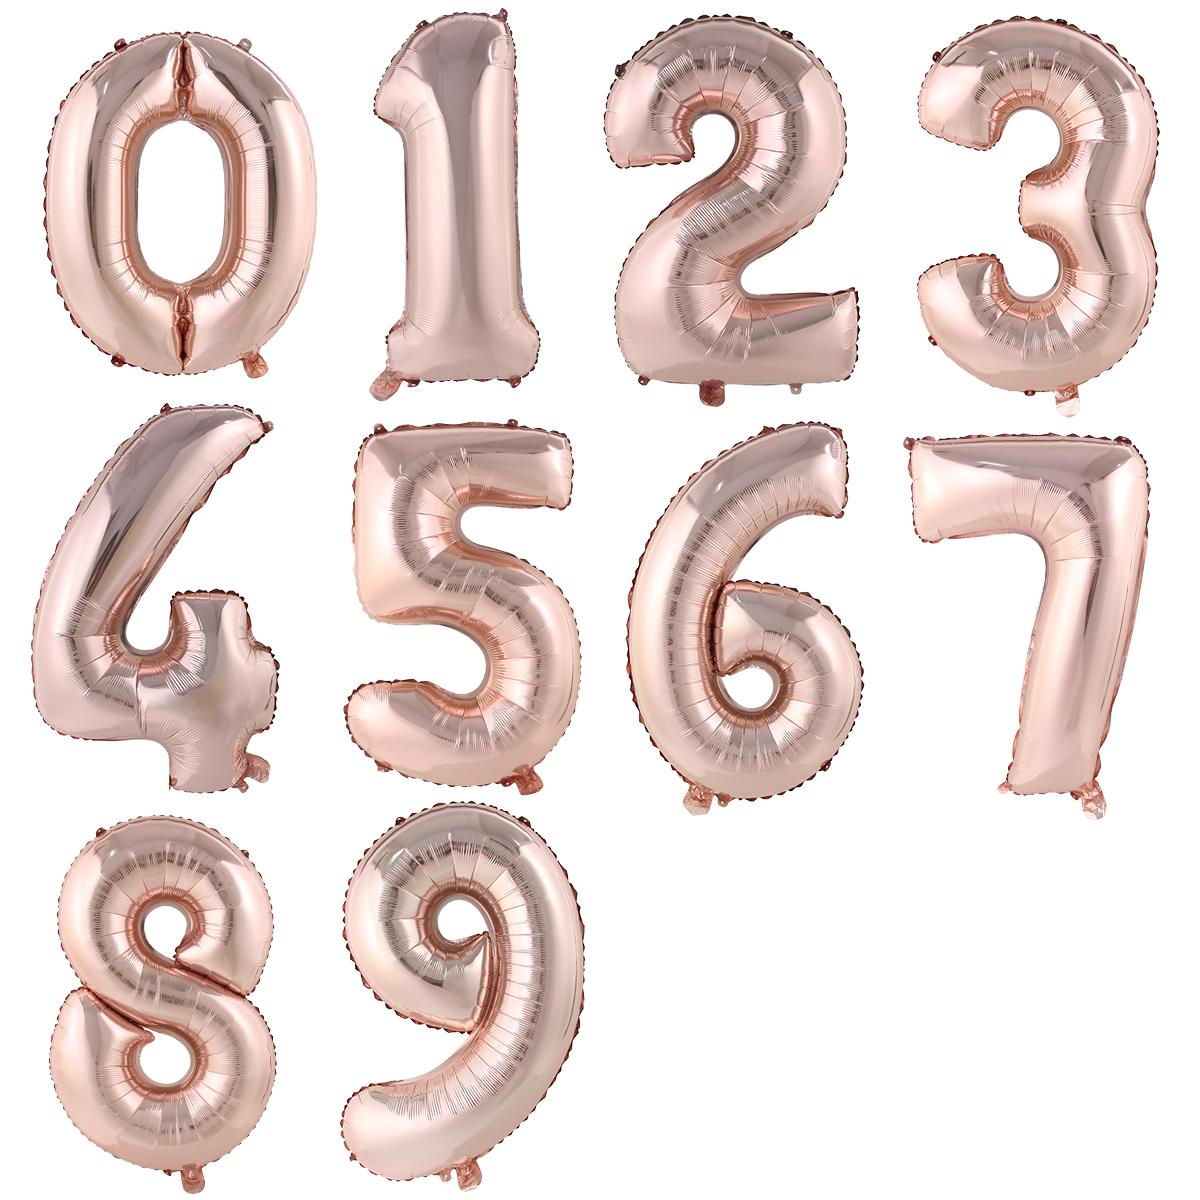 Number balloons, rose gold